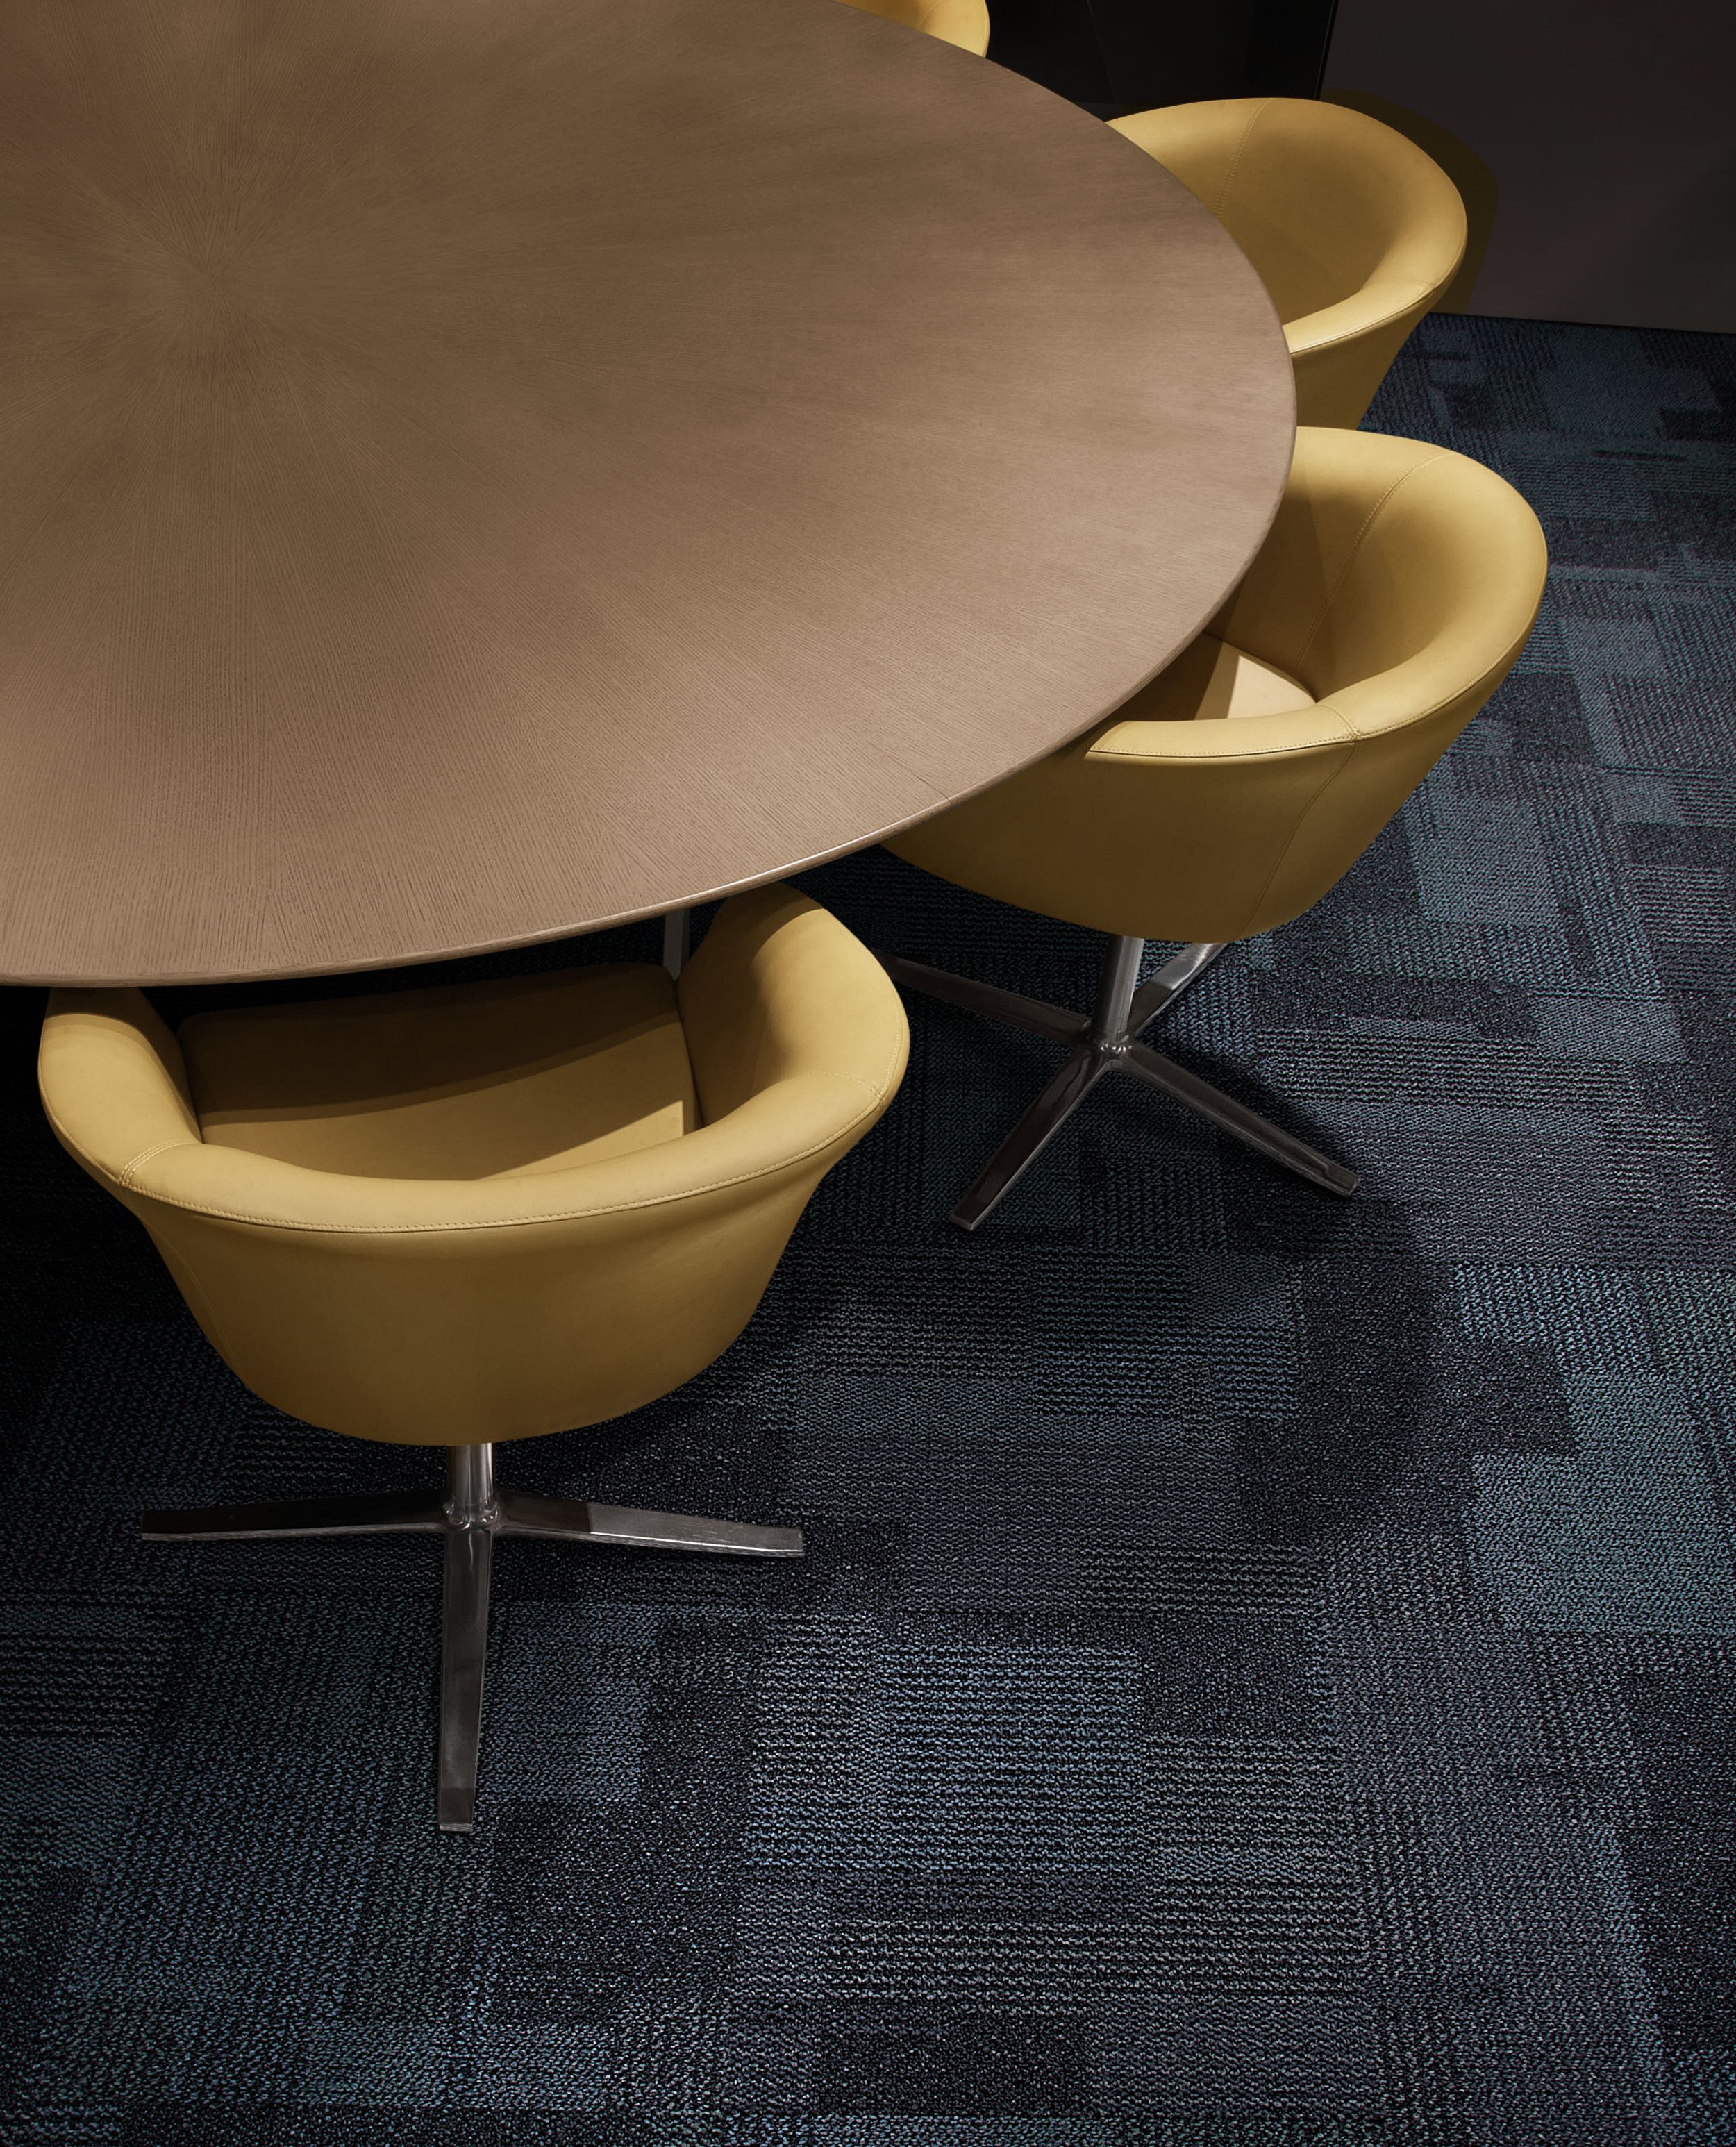 Interface Entropy carpet tile in meeting room with round wooden table and yellow chairs imagen número 1